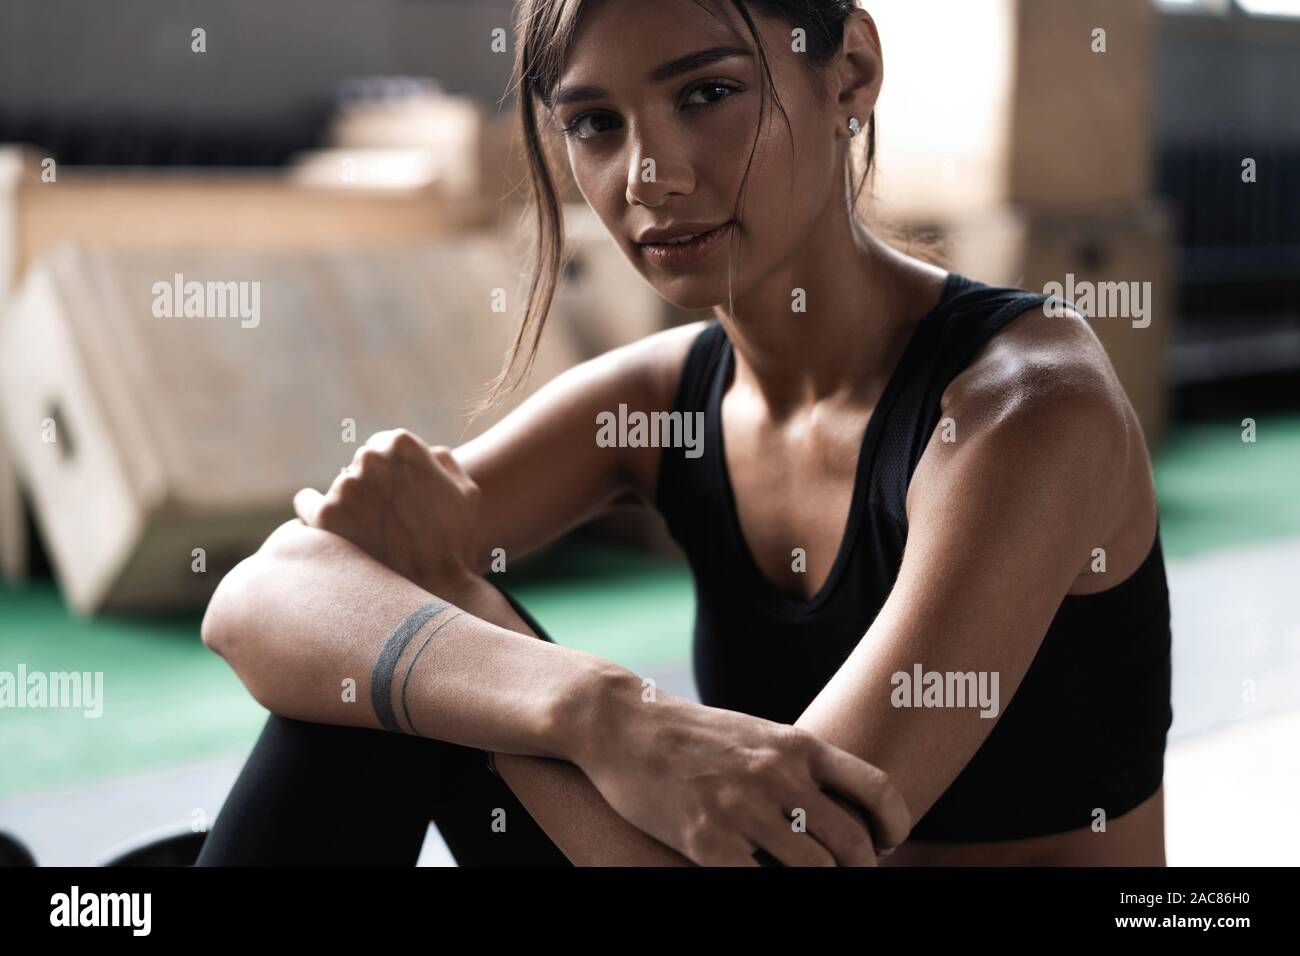 Young woman sitting on floor after her workout and looking down. Female athlete taking rest after fitness training Stock Photo